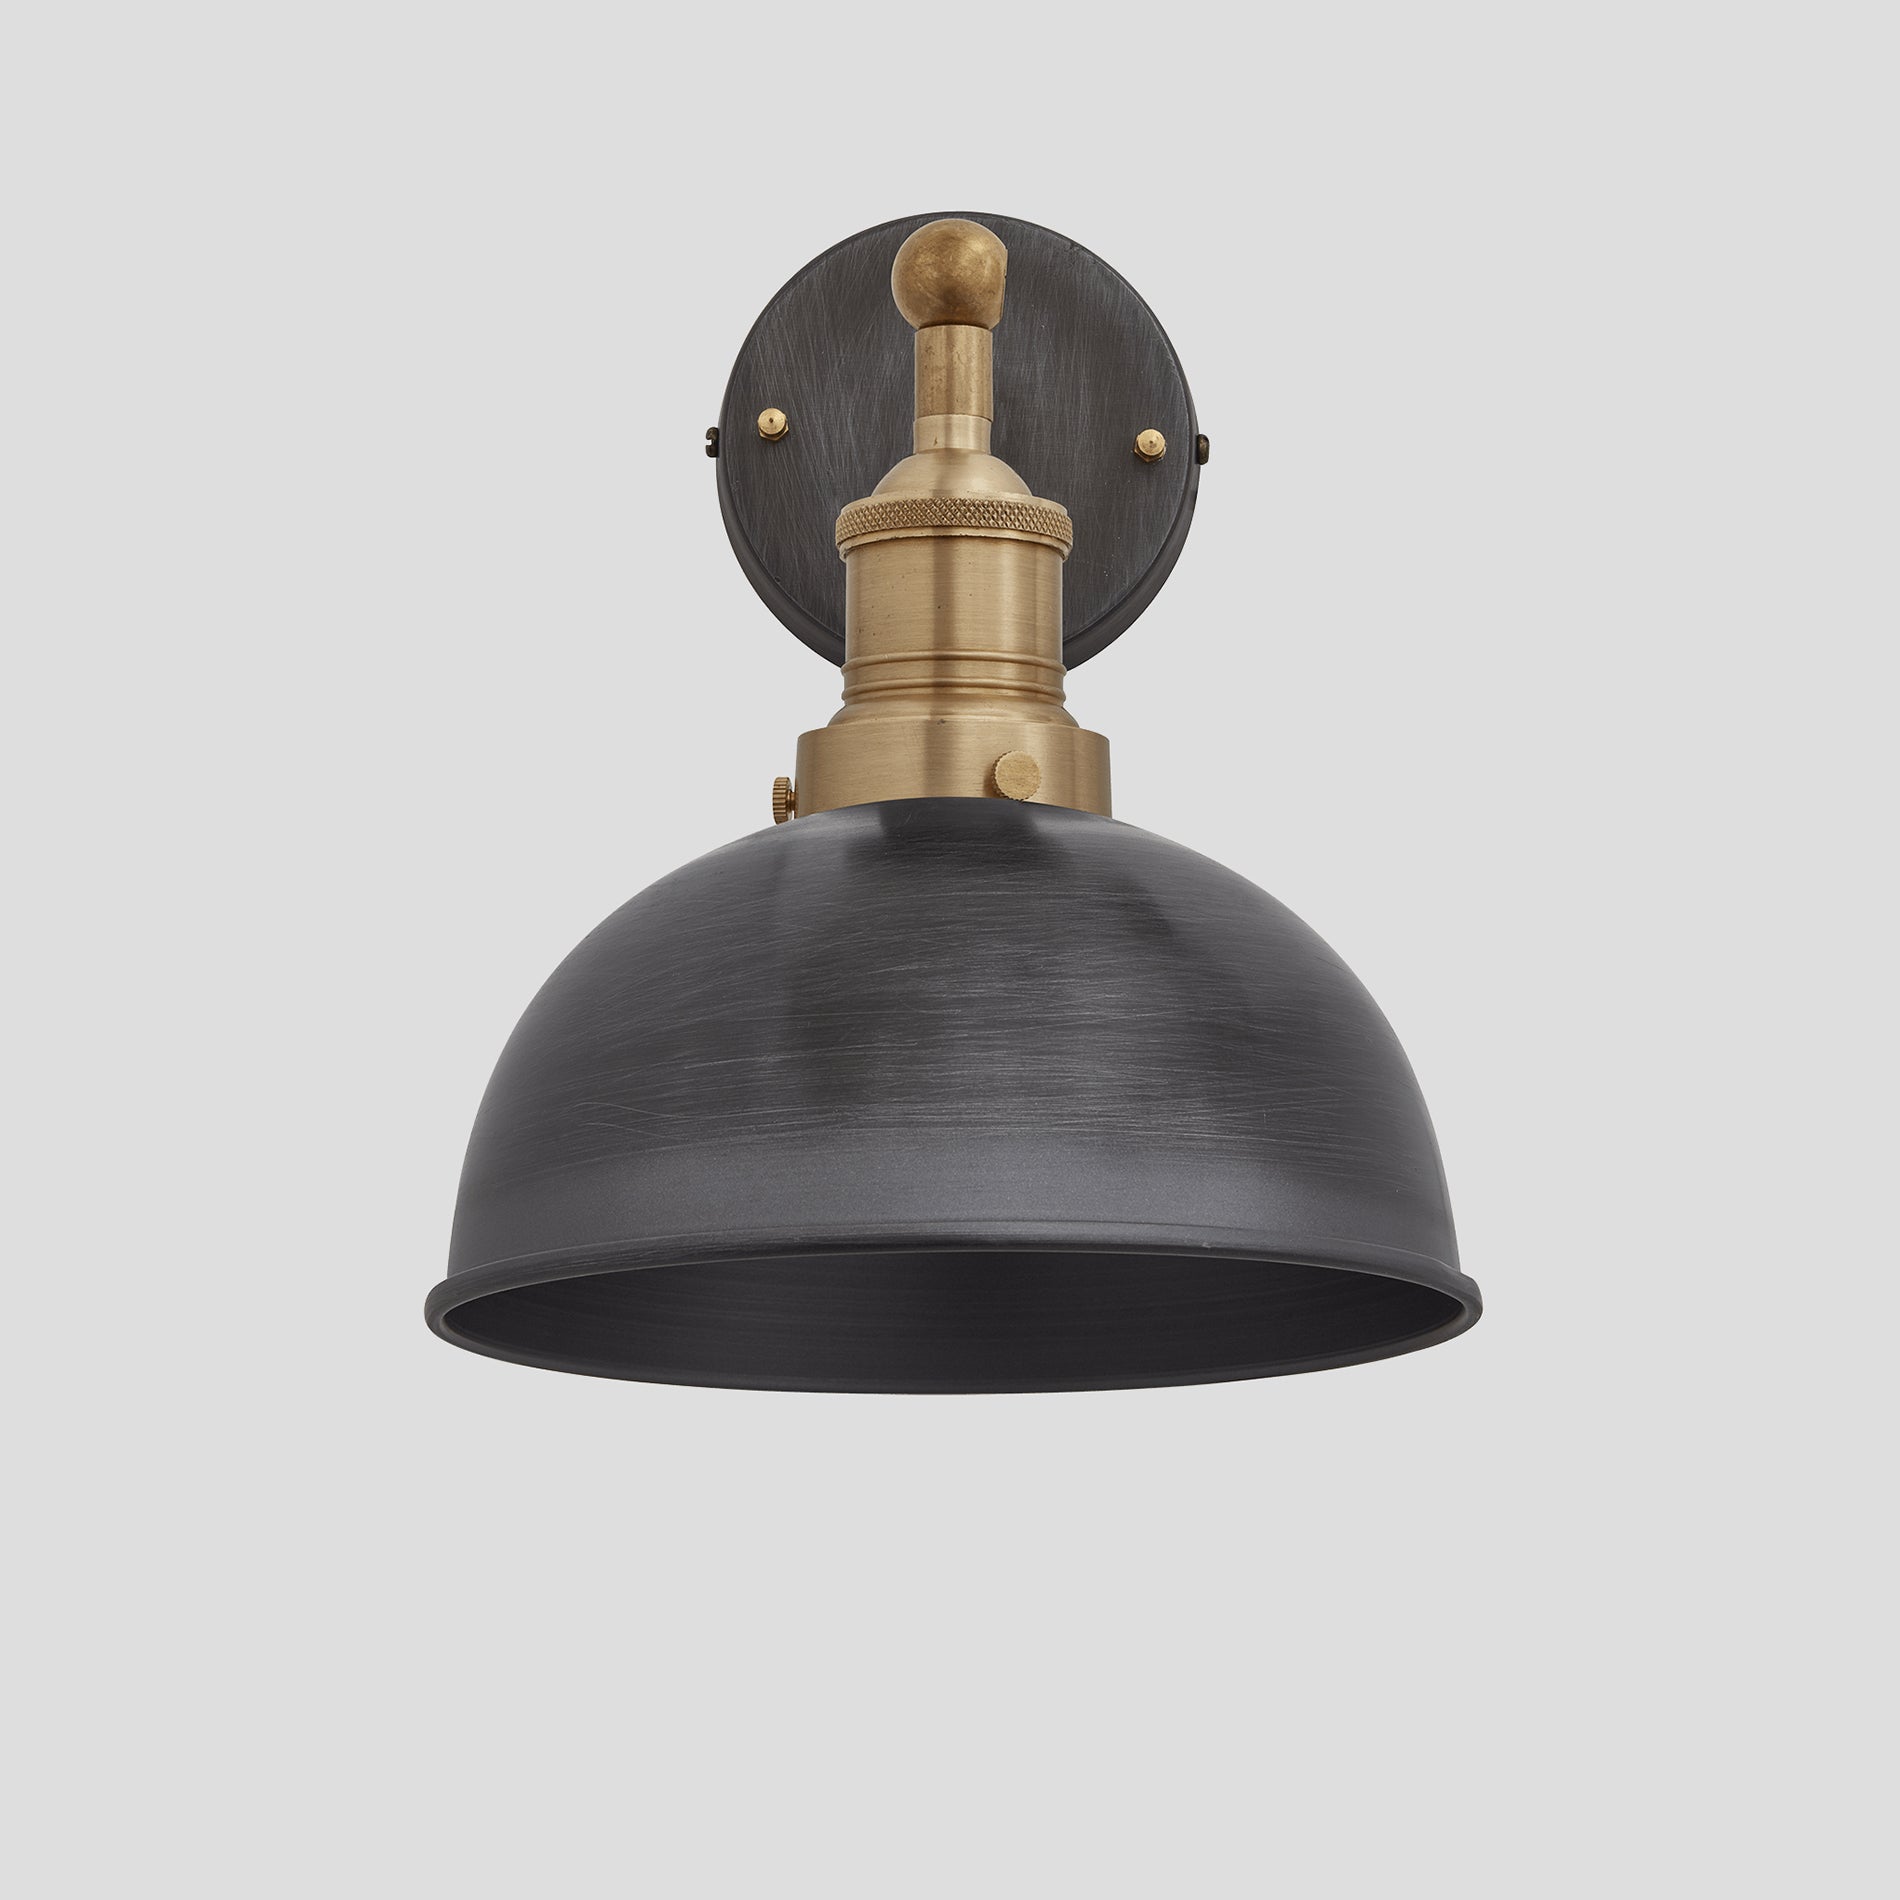 Brooklyn Dome Wall Light - 8 Inch - Pewter Industville BR-DWL8-P-BH